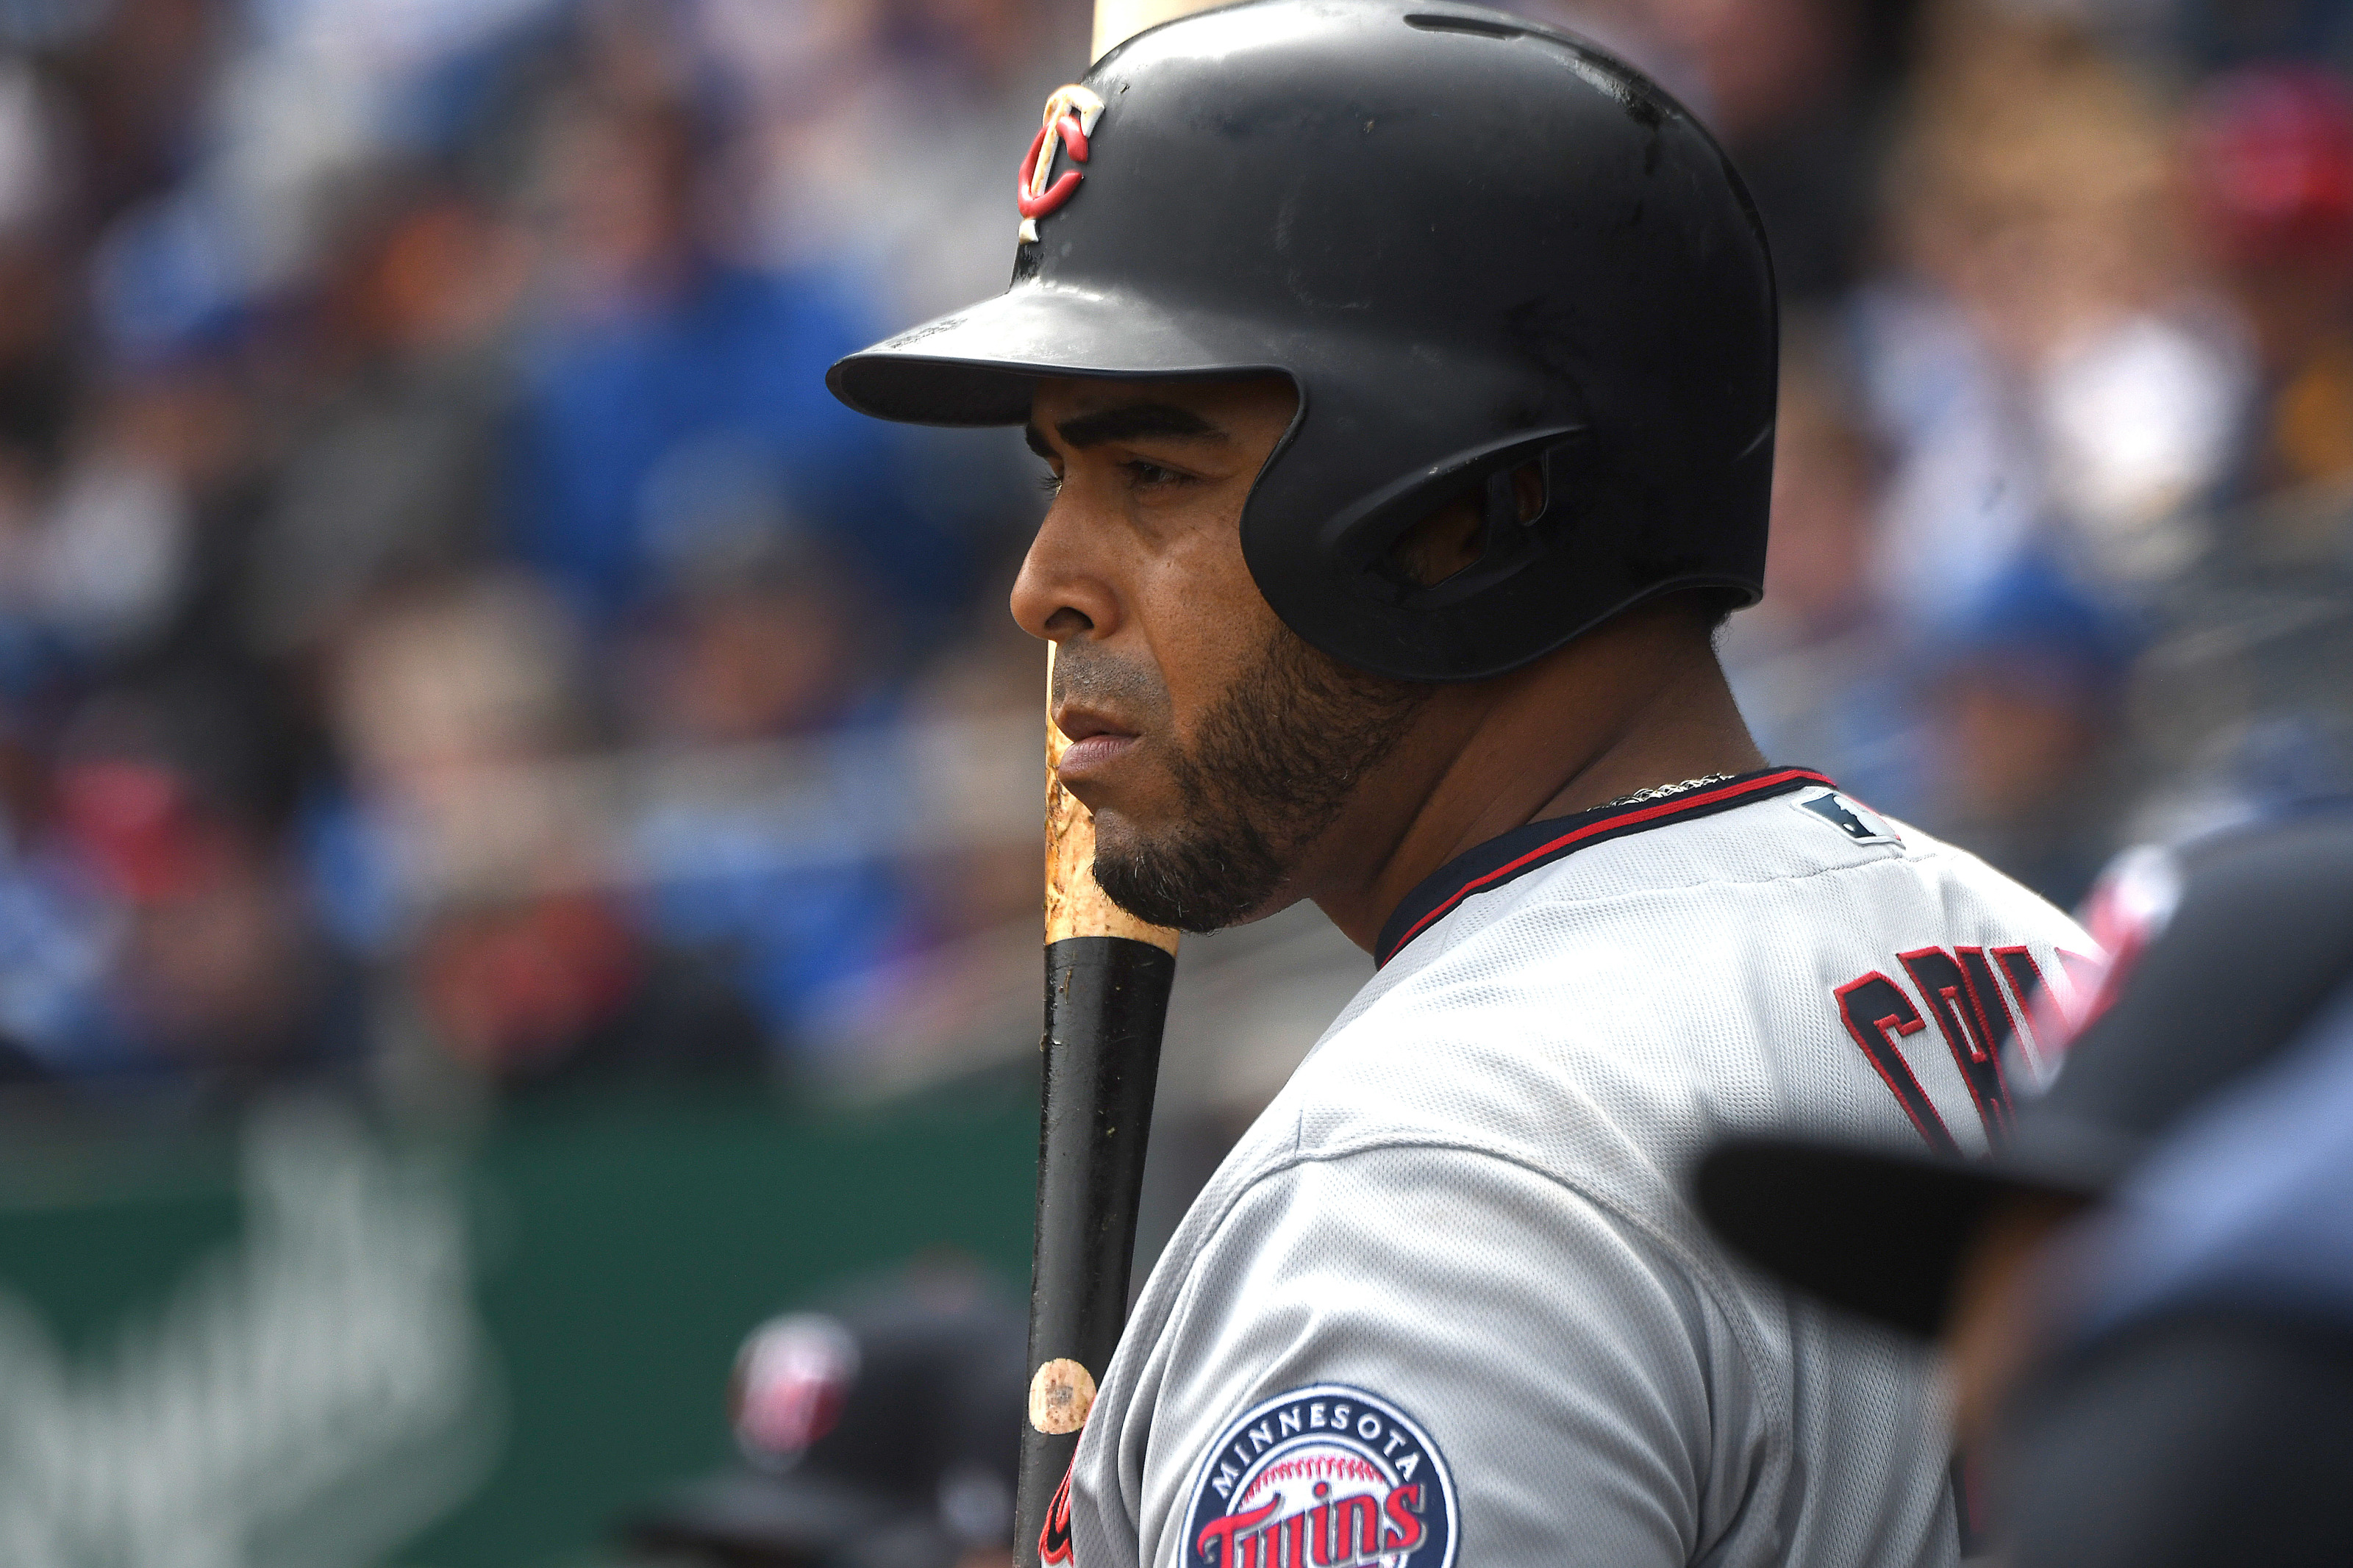 Even at 42, Padres' Nelson Cruz is still what the Twins need